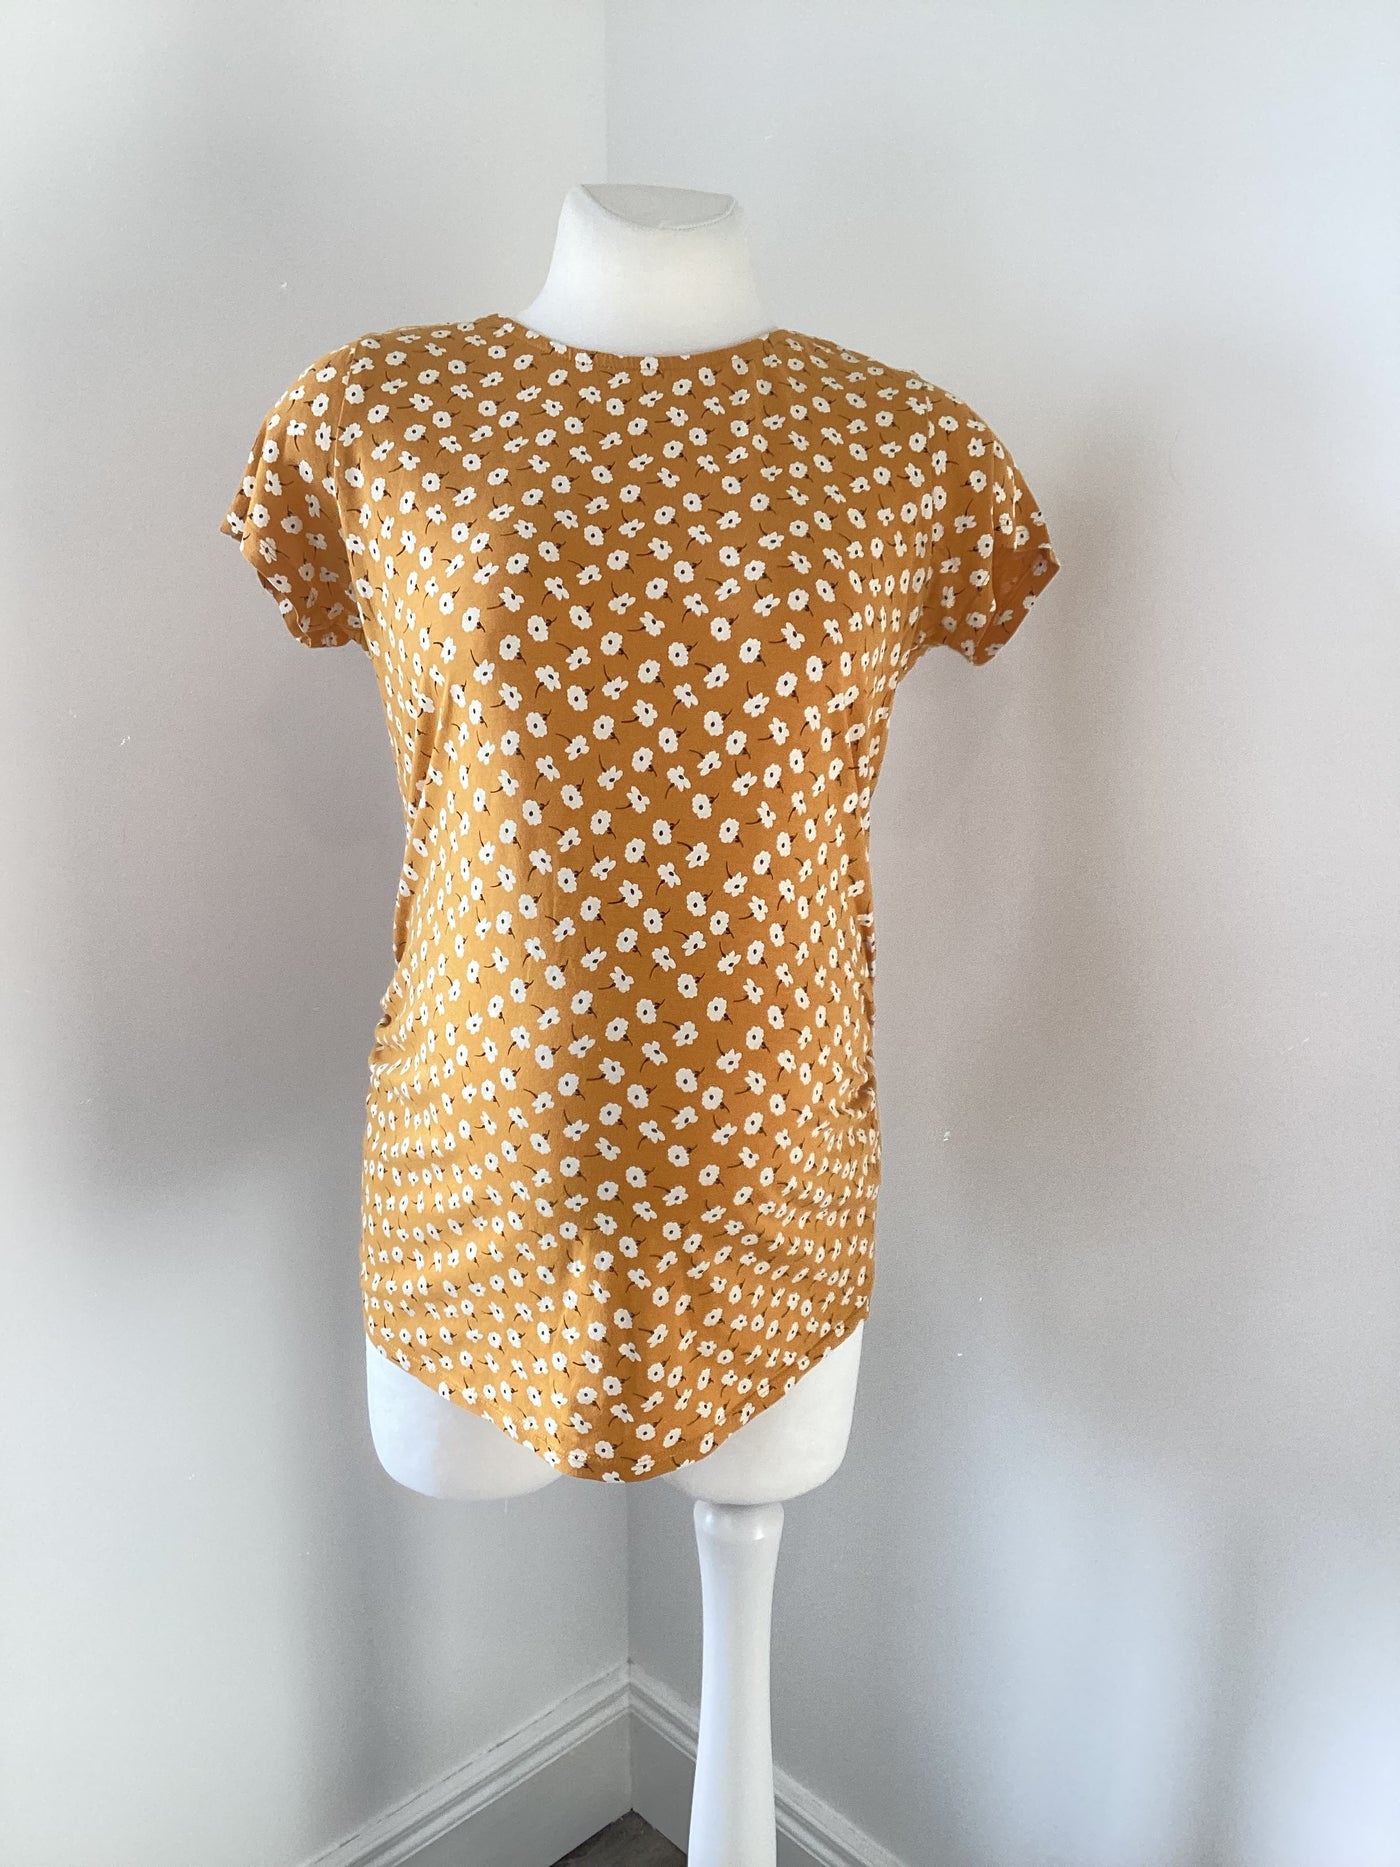 New Look Maternity mustard & white floral short sleeved top - Size 10